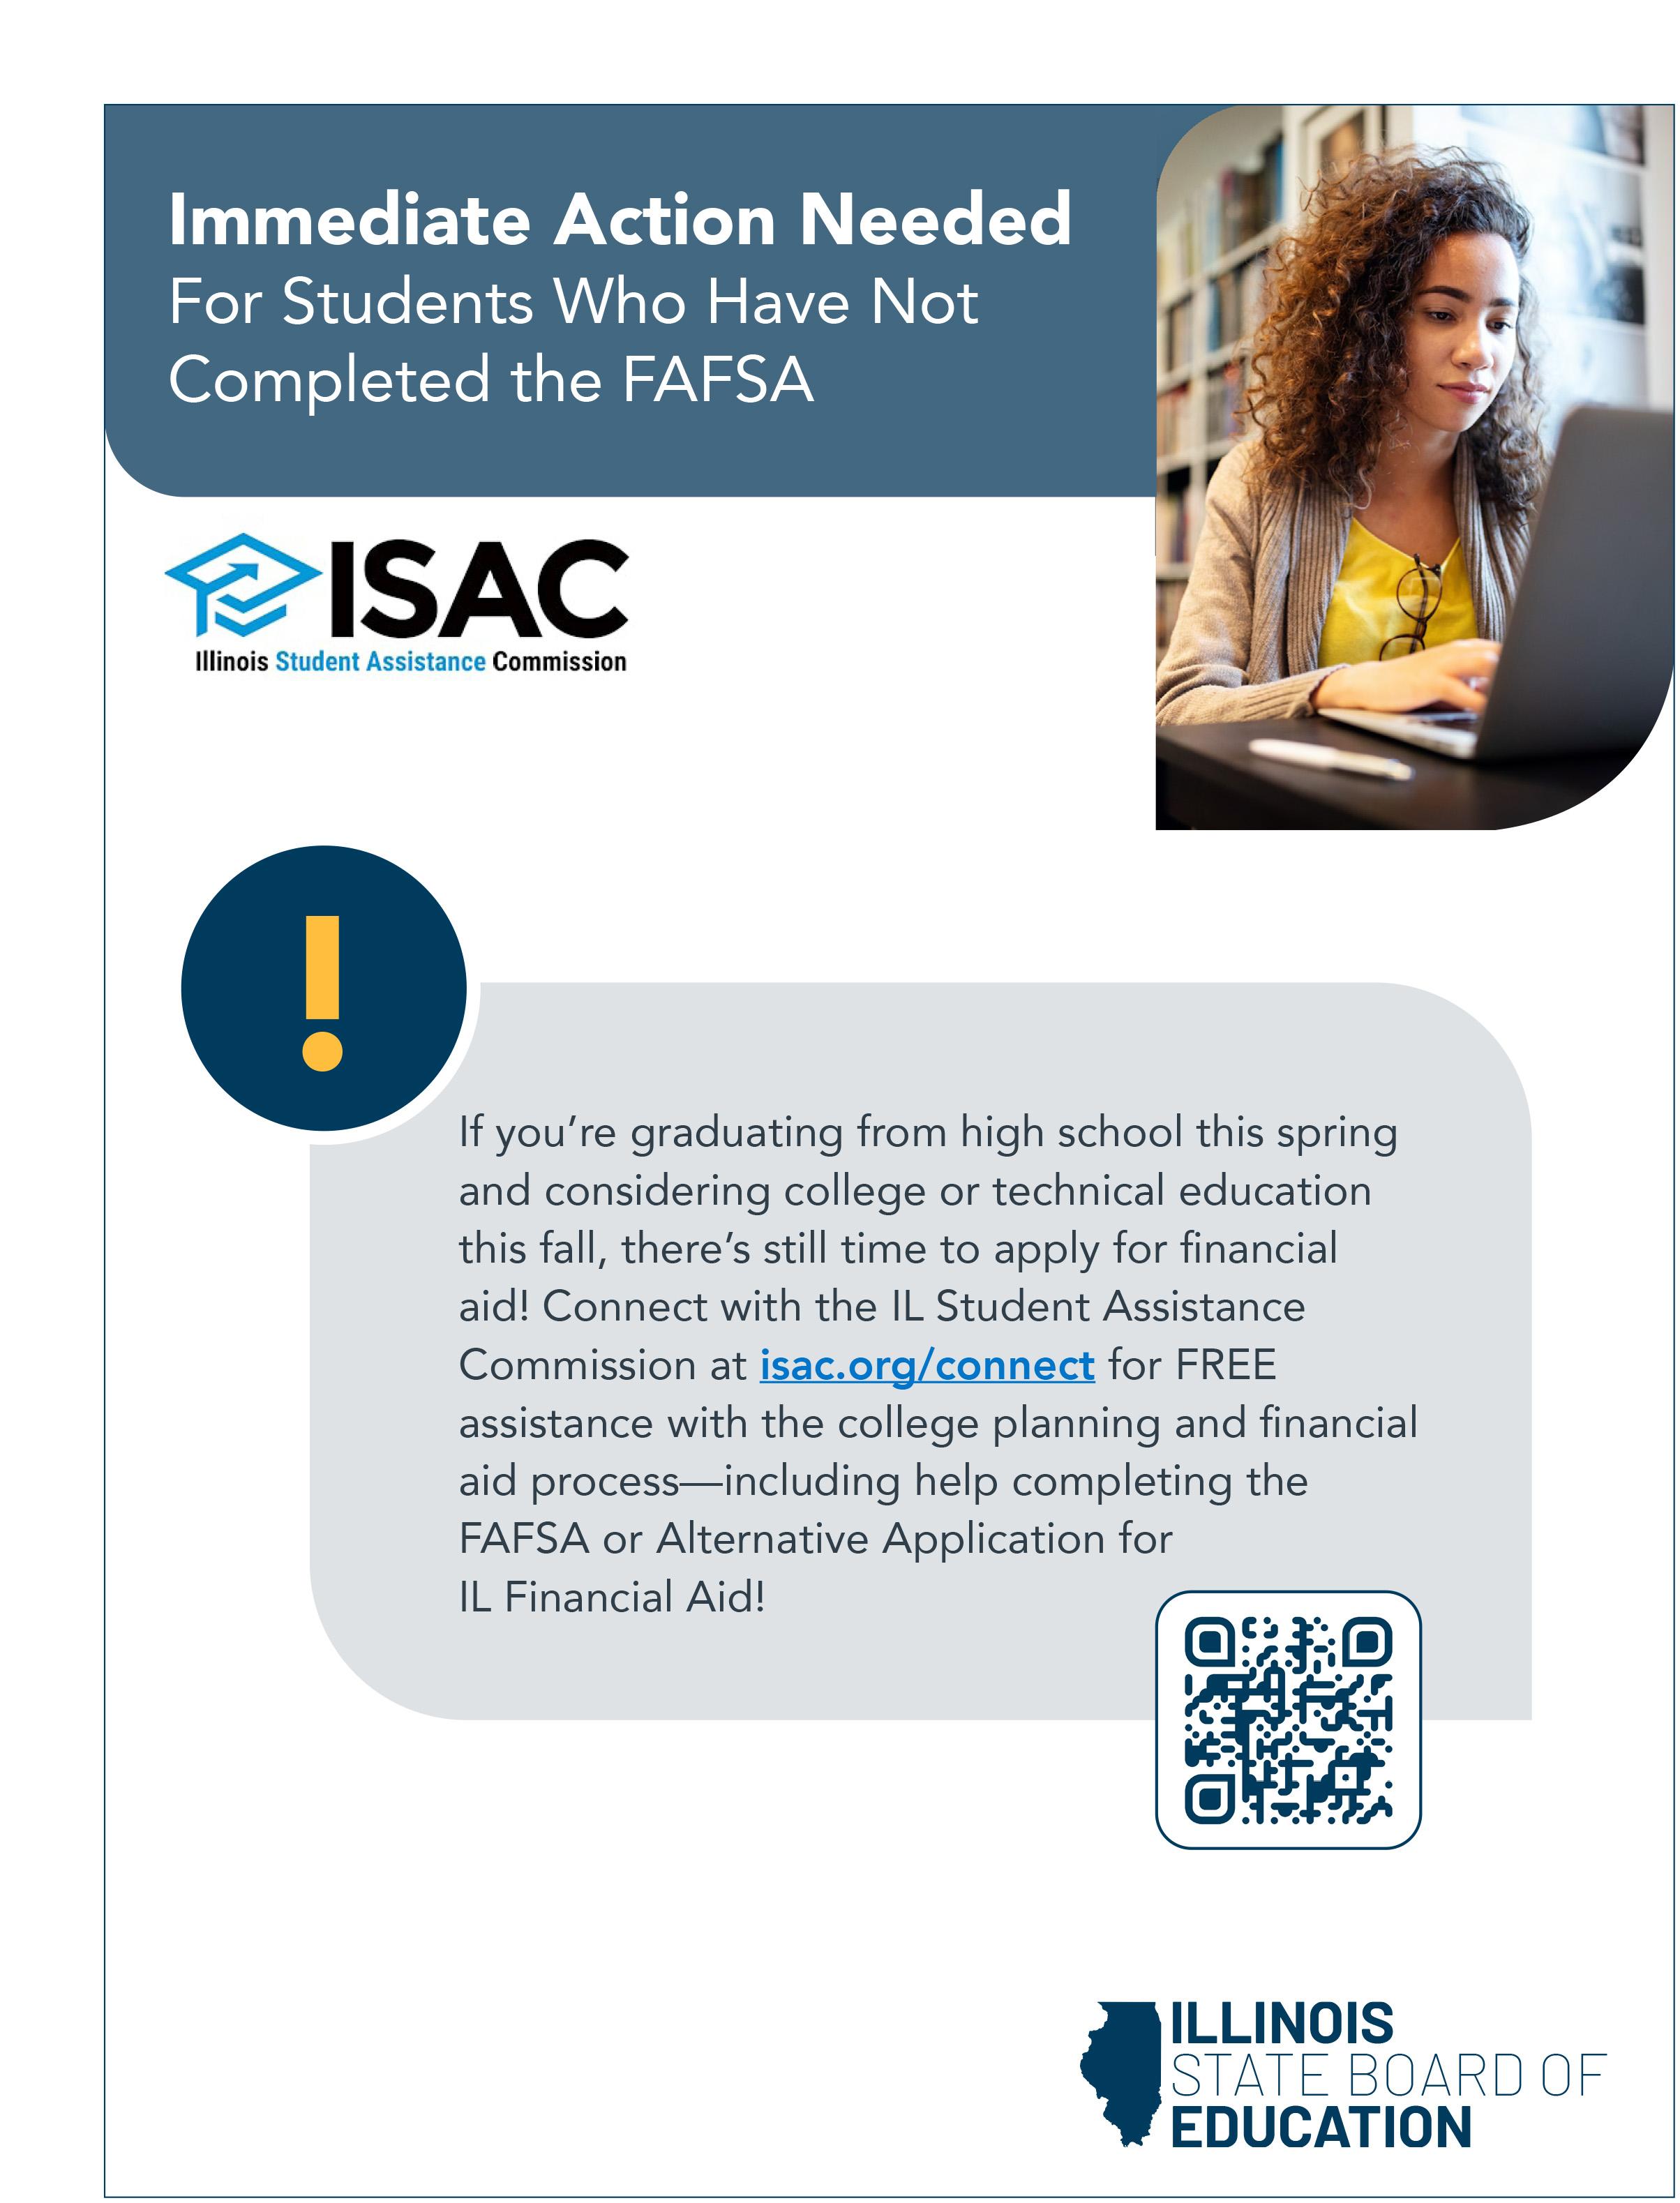 Important reminder for the class of 2024 to complete the FAFSA